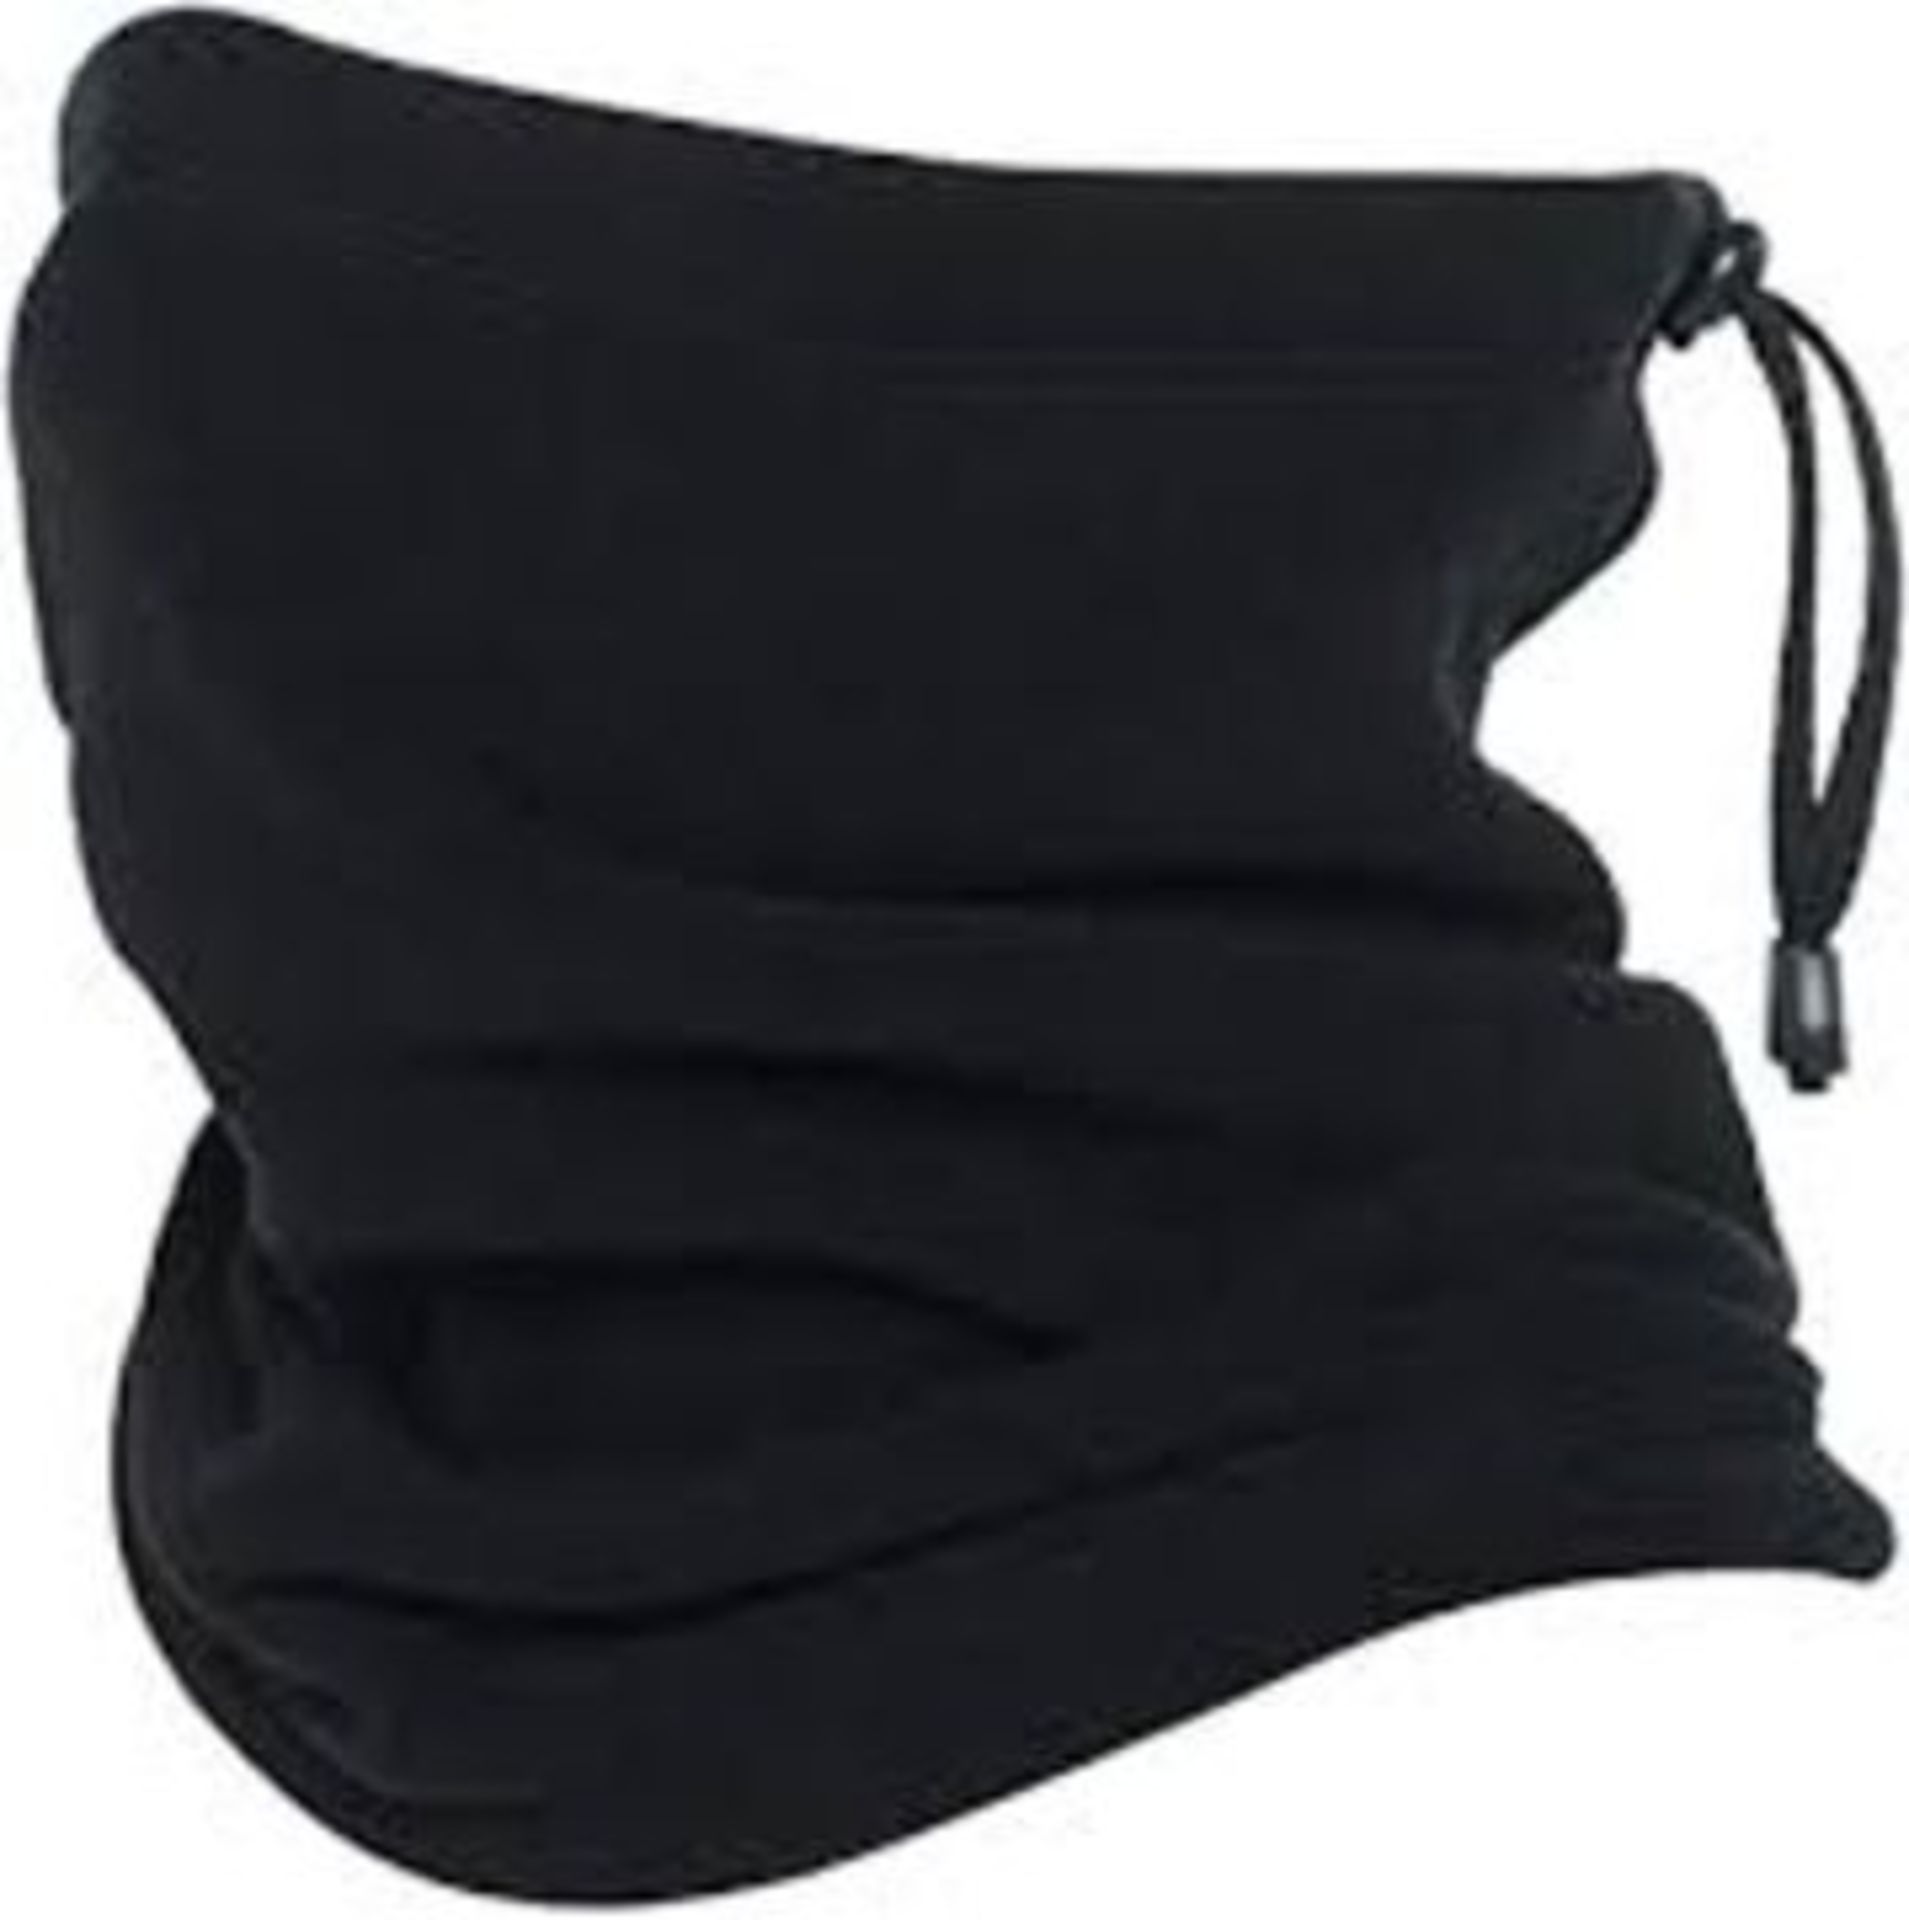 10 X New Packaged VBIGER Neck Warmer Snood With Adjustable Strap. - Image 3 of 3